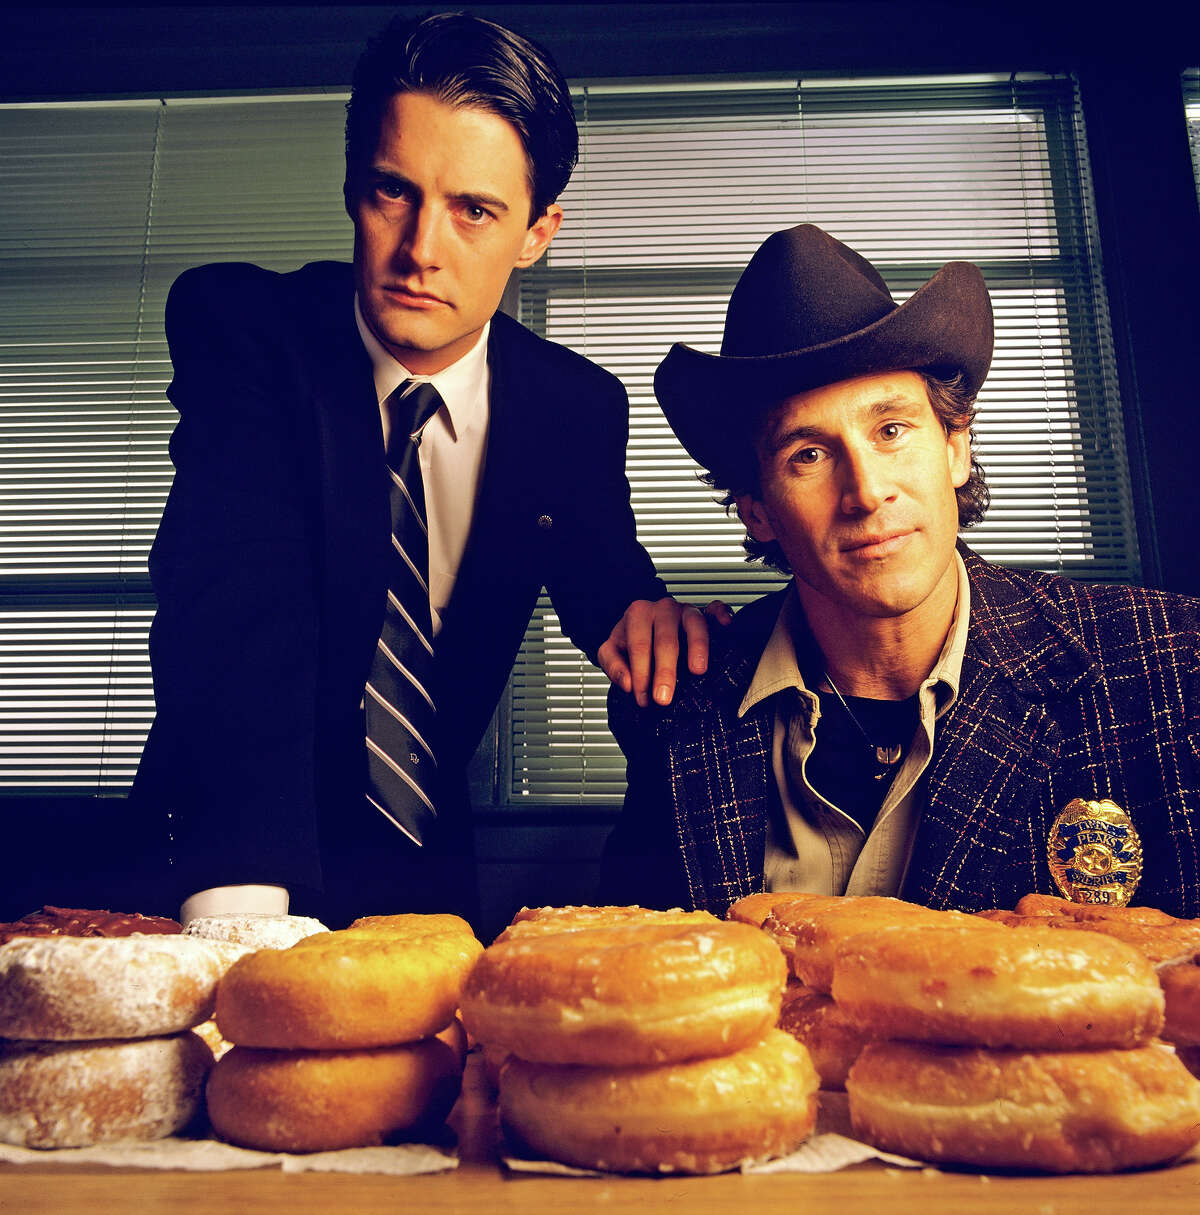 The original: Homecoming queen Laura Palmer is found dead, washed up on a riverbank wrapped in plastic sheeting. FBI Special Agent Dale Cooper (Kyle MacLaughlin, left) is called in to work with local Sheriff Harry S.Truman (Michael Ontkean) in the investigation of the gruesome murder in the small Northwestern town of Twin Peaks. 